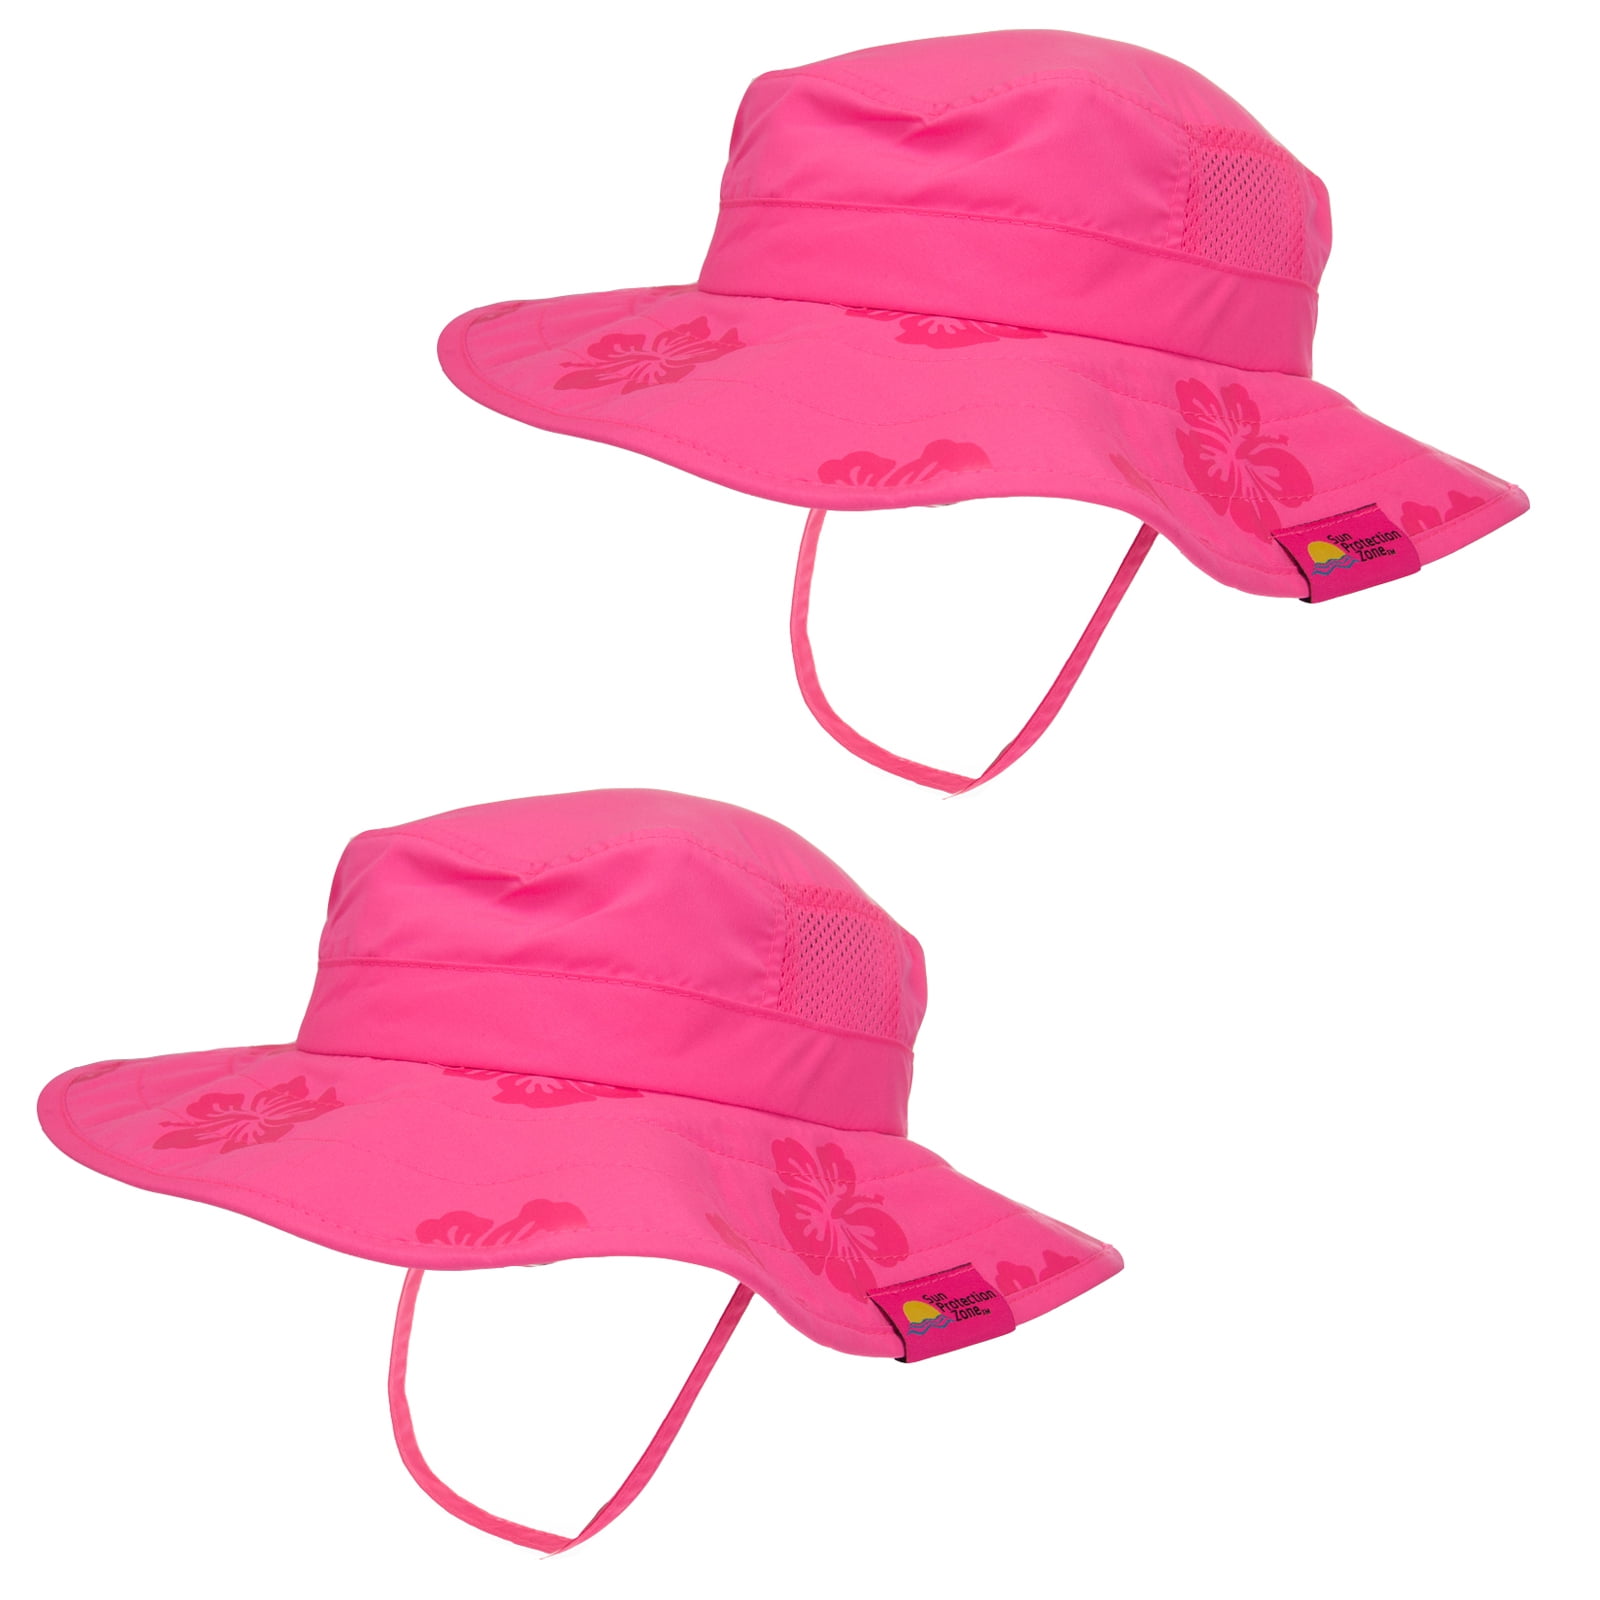 NWT Girl Pink Safari Hat  SUN PROTECTION ZONE Kids Children Ages 3-8 adjustable 